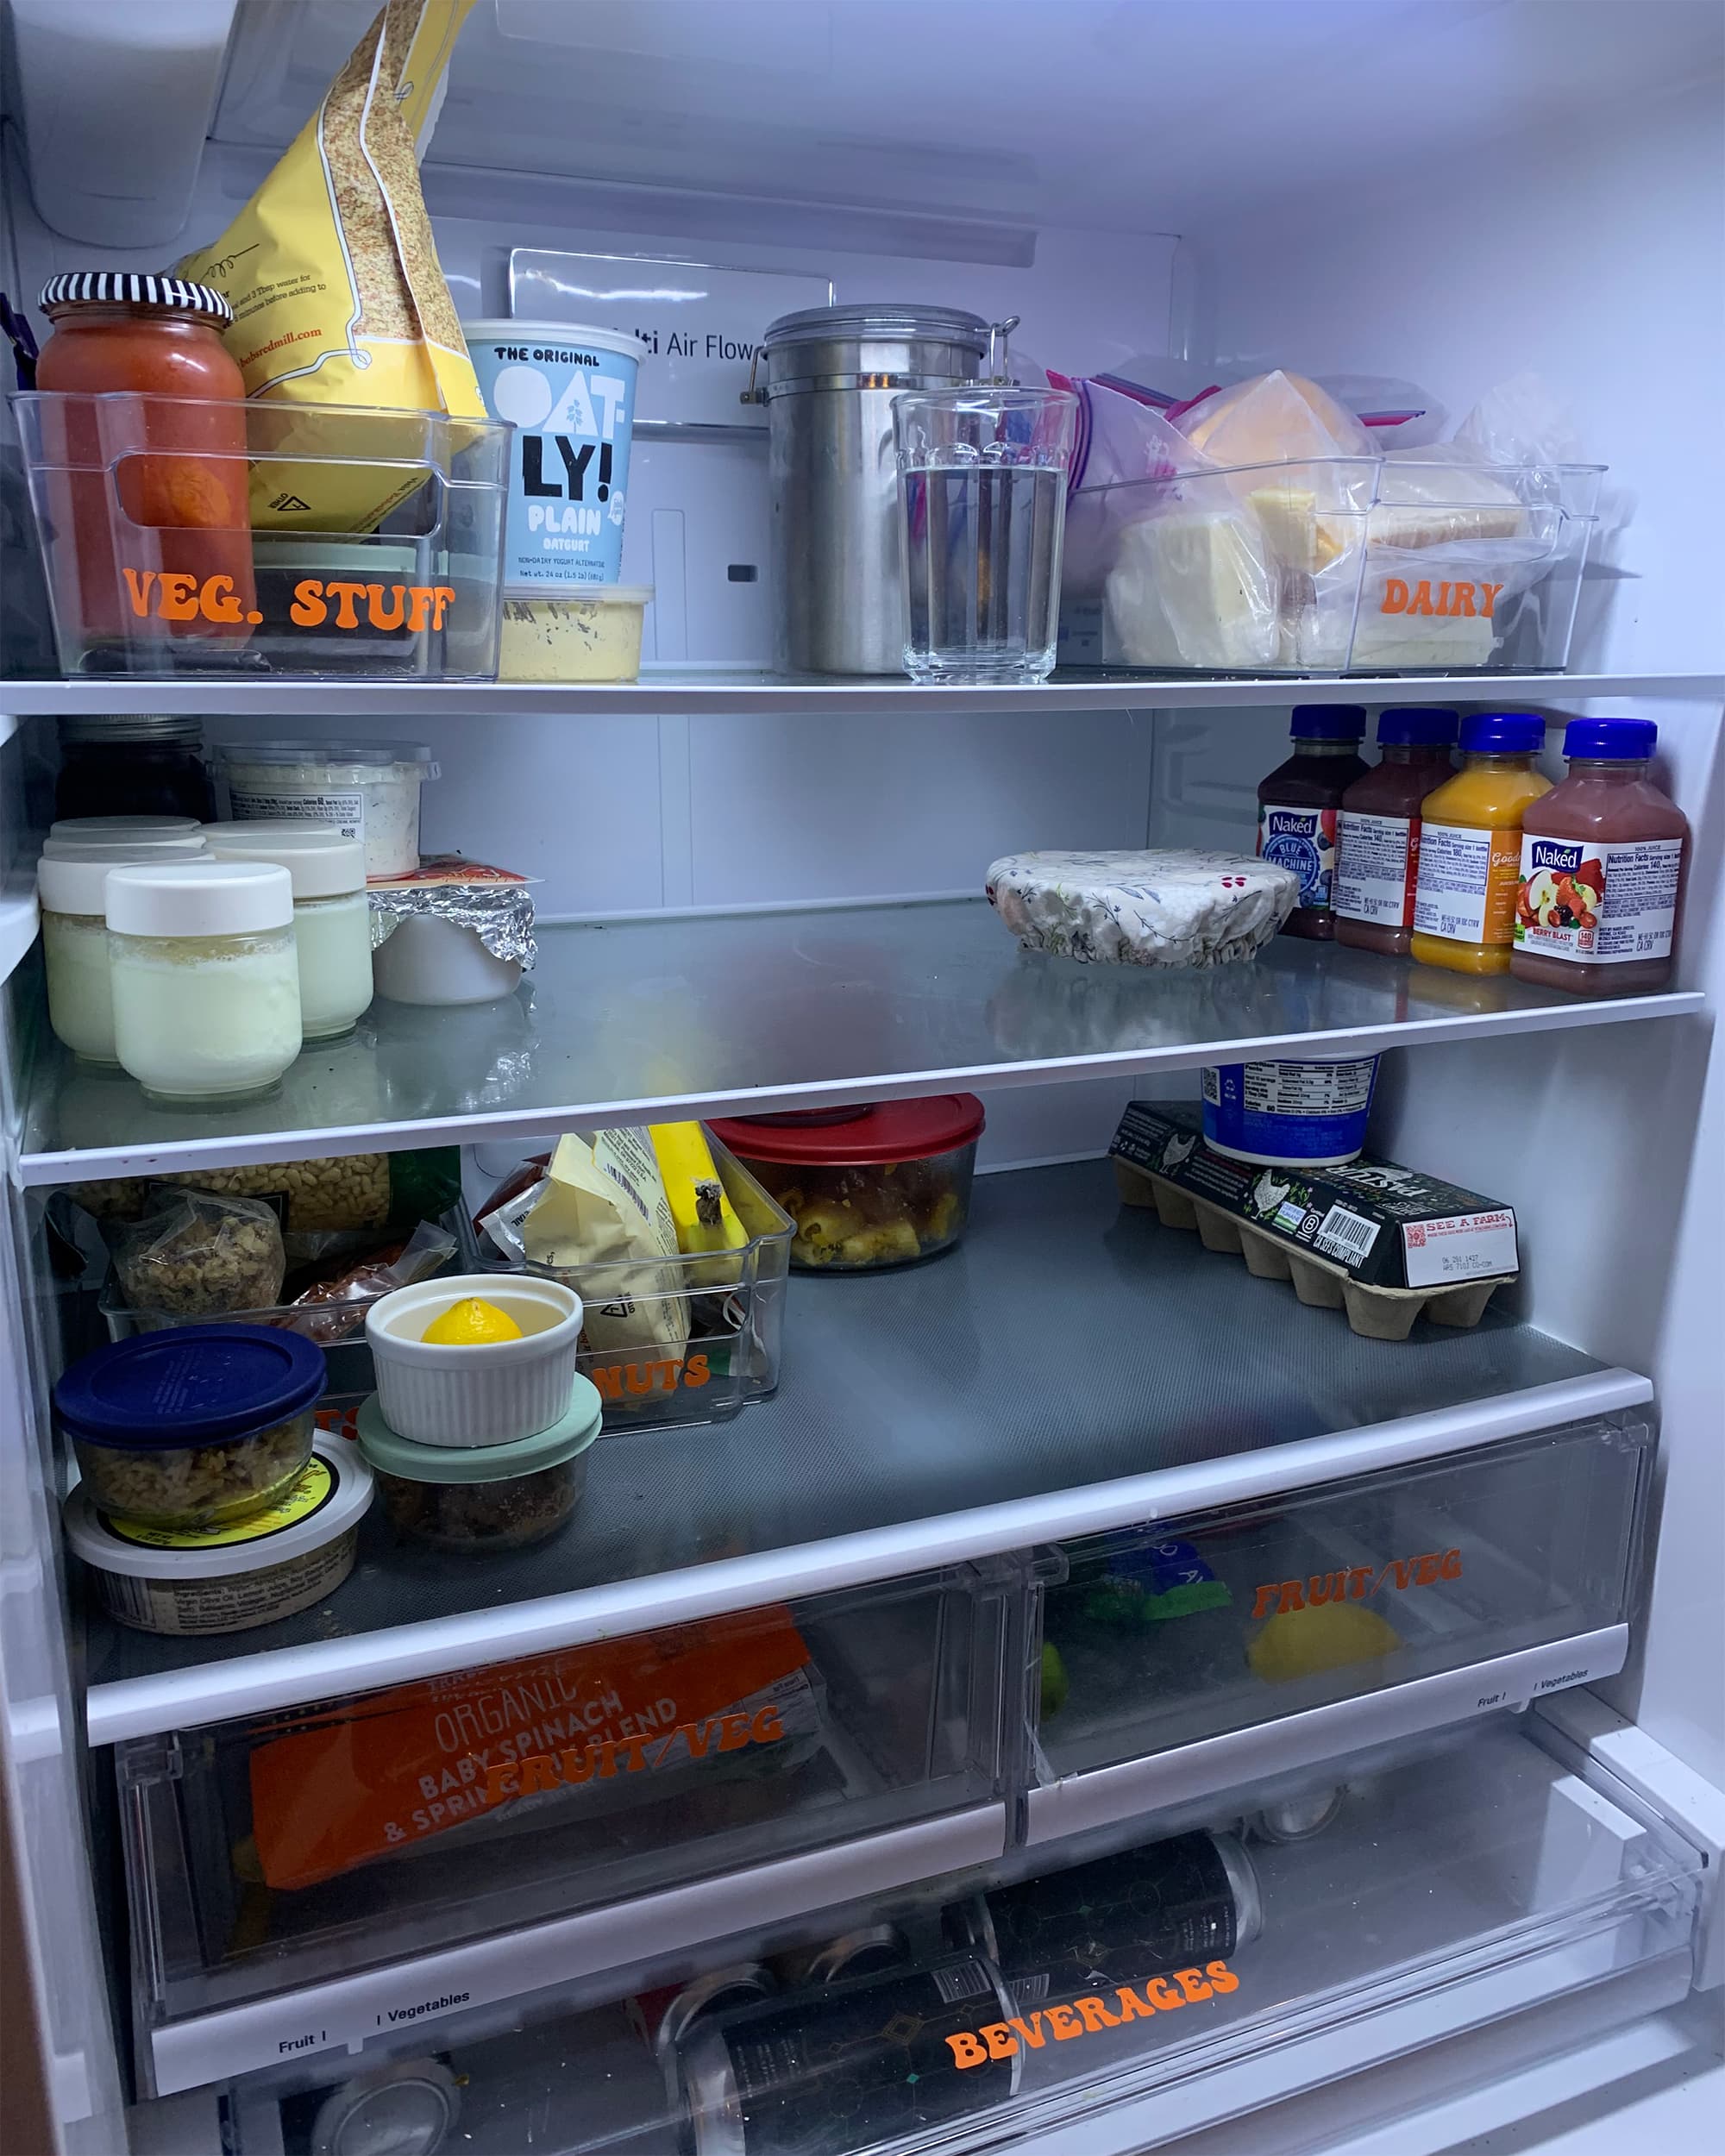 How to Organize your Fridge - the ultimate guide to fridge organization -  Broma Bakery